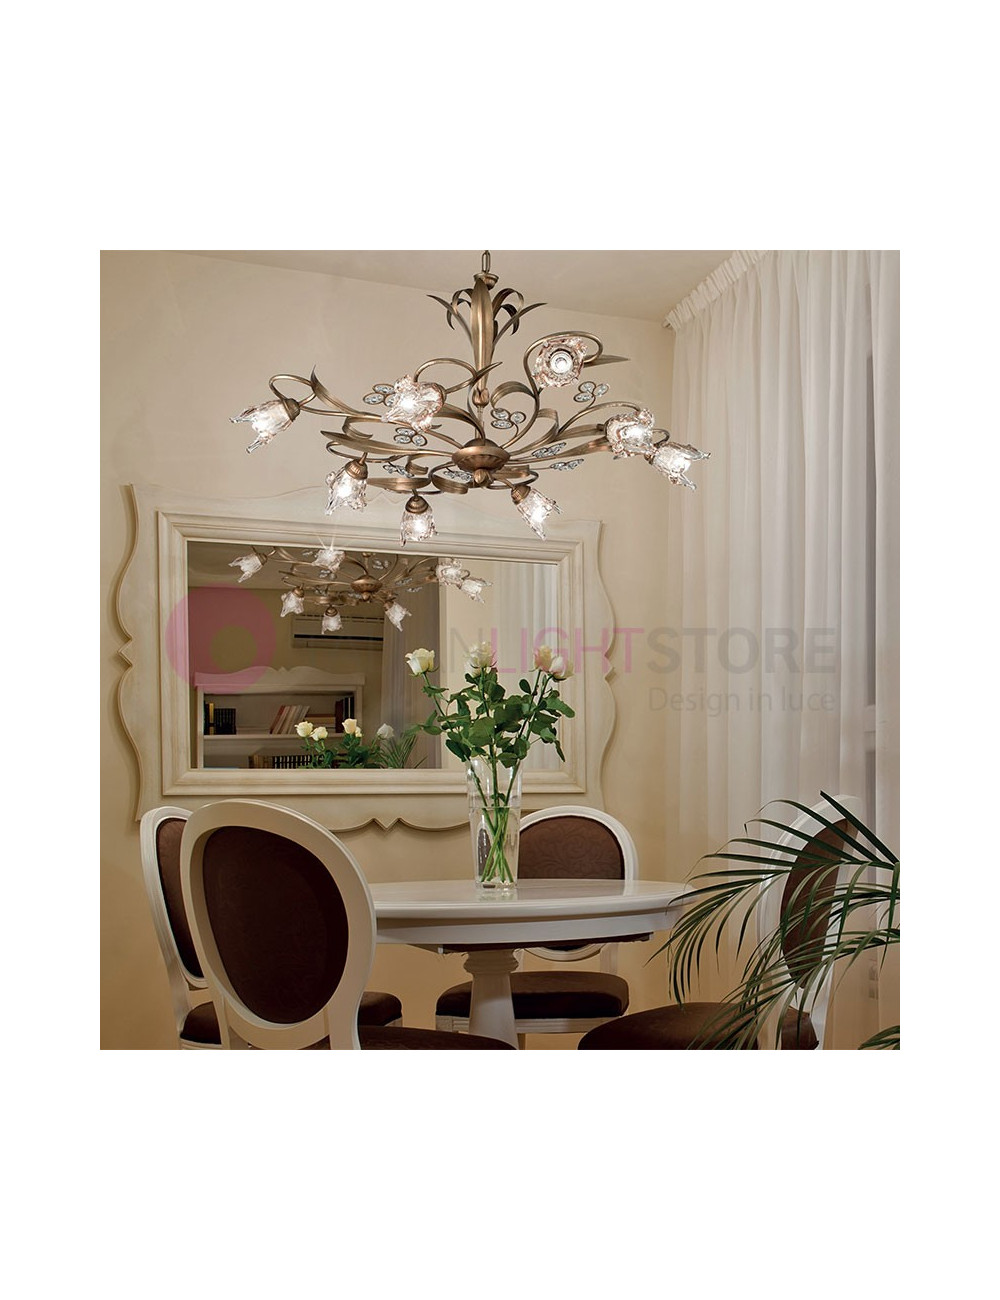 SOFIA Classic Style Rustic Chandelier 8 Lights